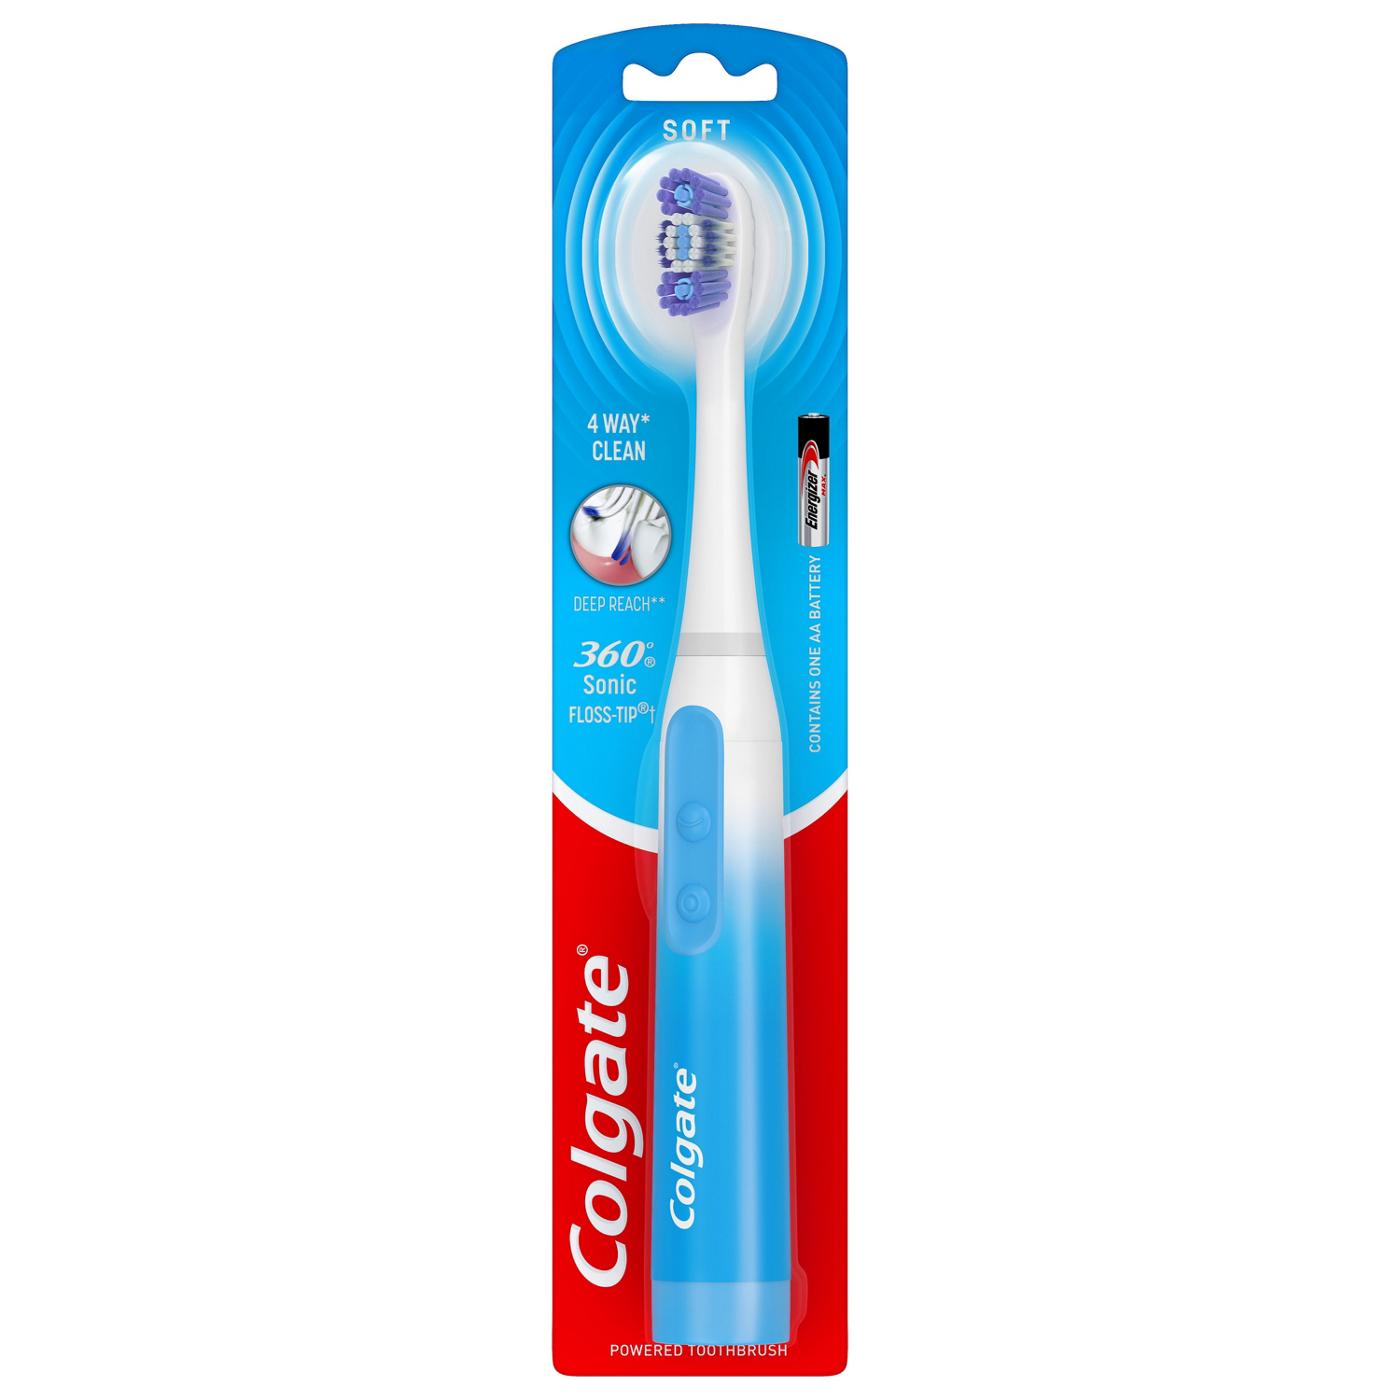 Colgate 360 Total Advanced Floss Tip Soft Powerbrush; image 1 of 8